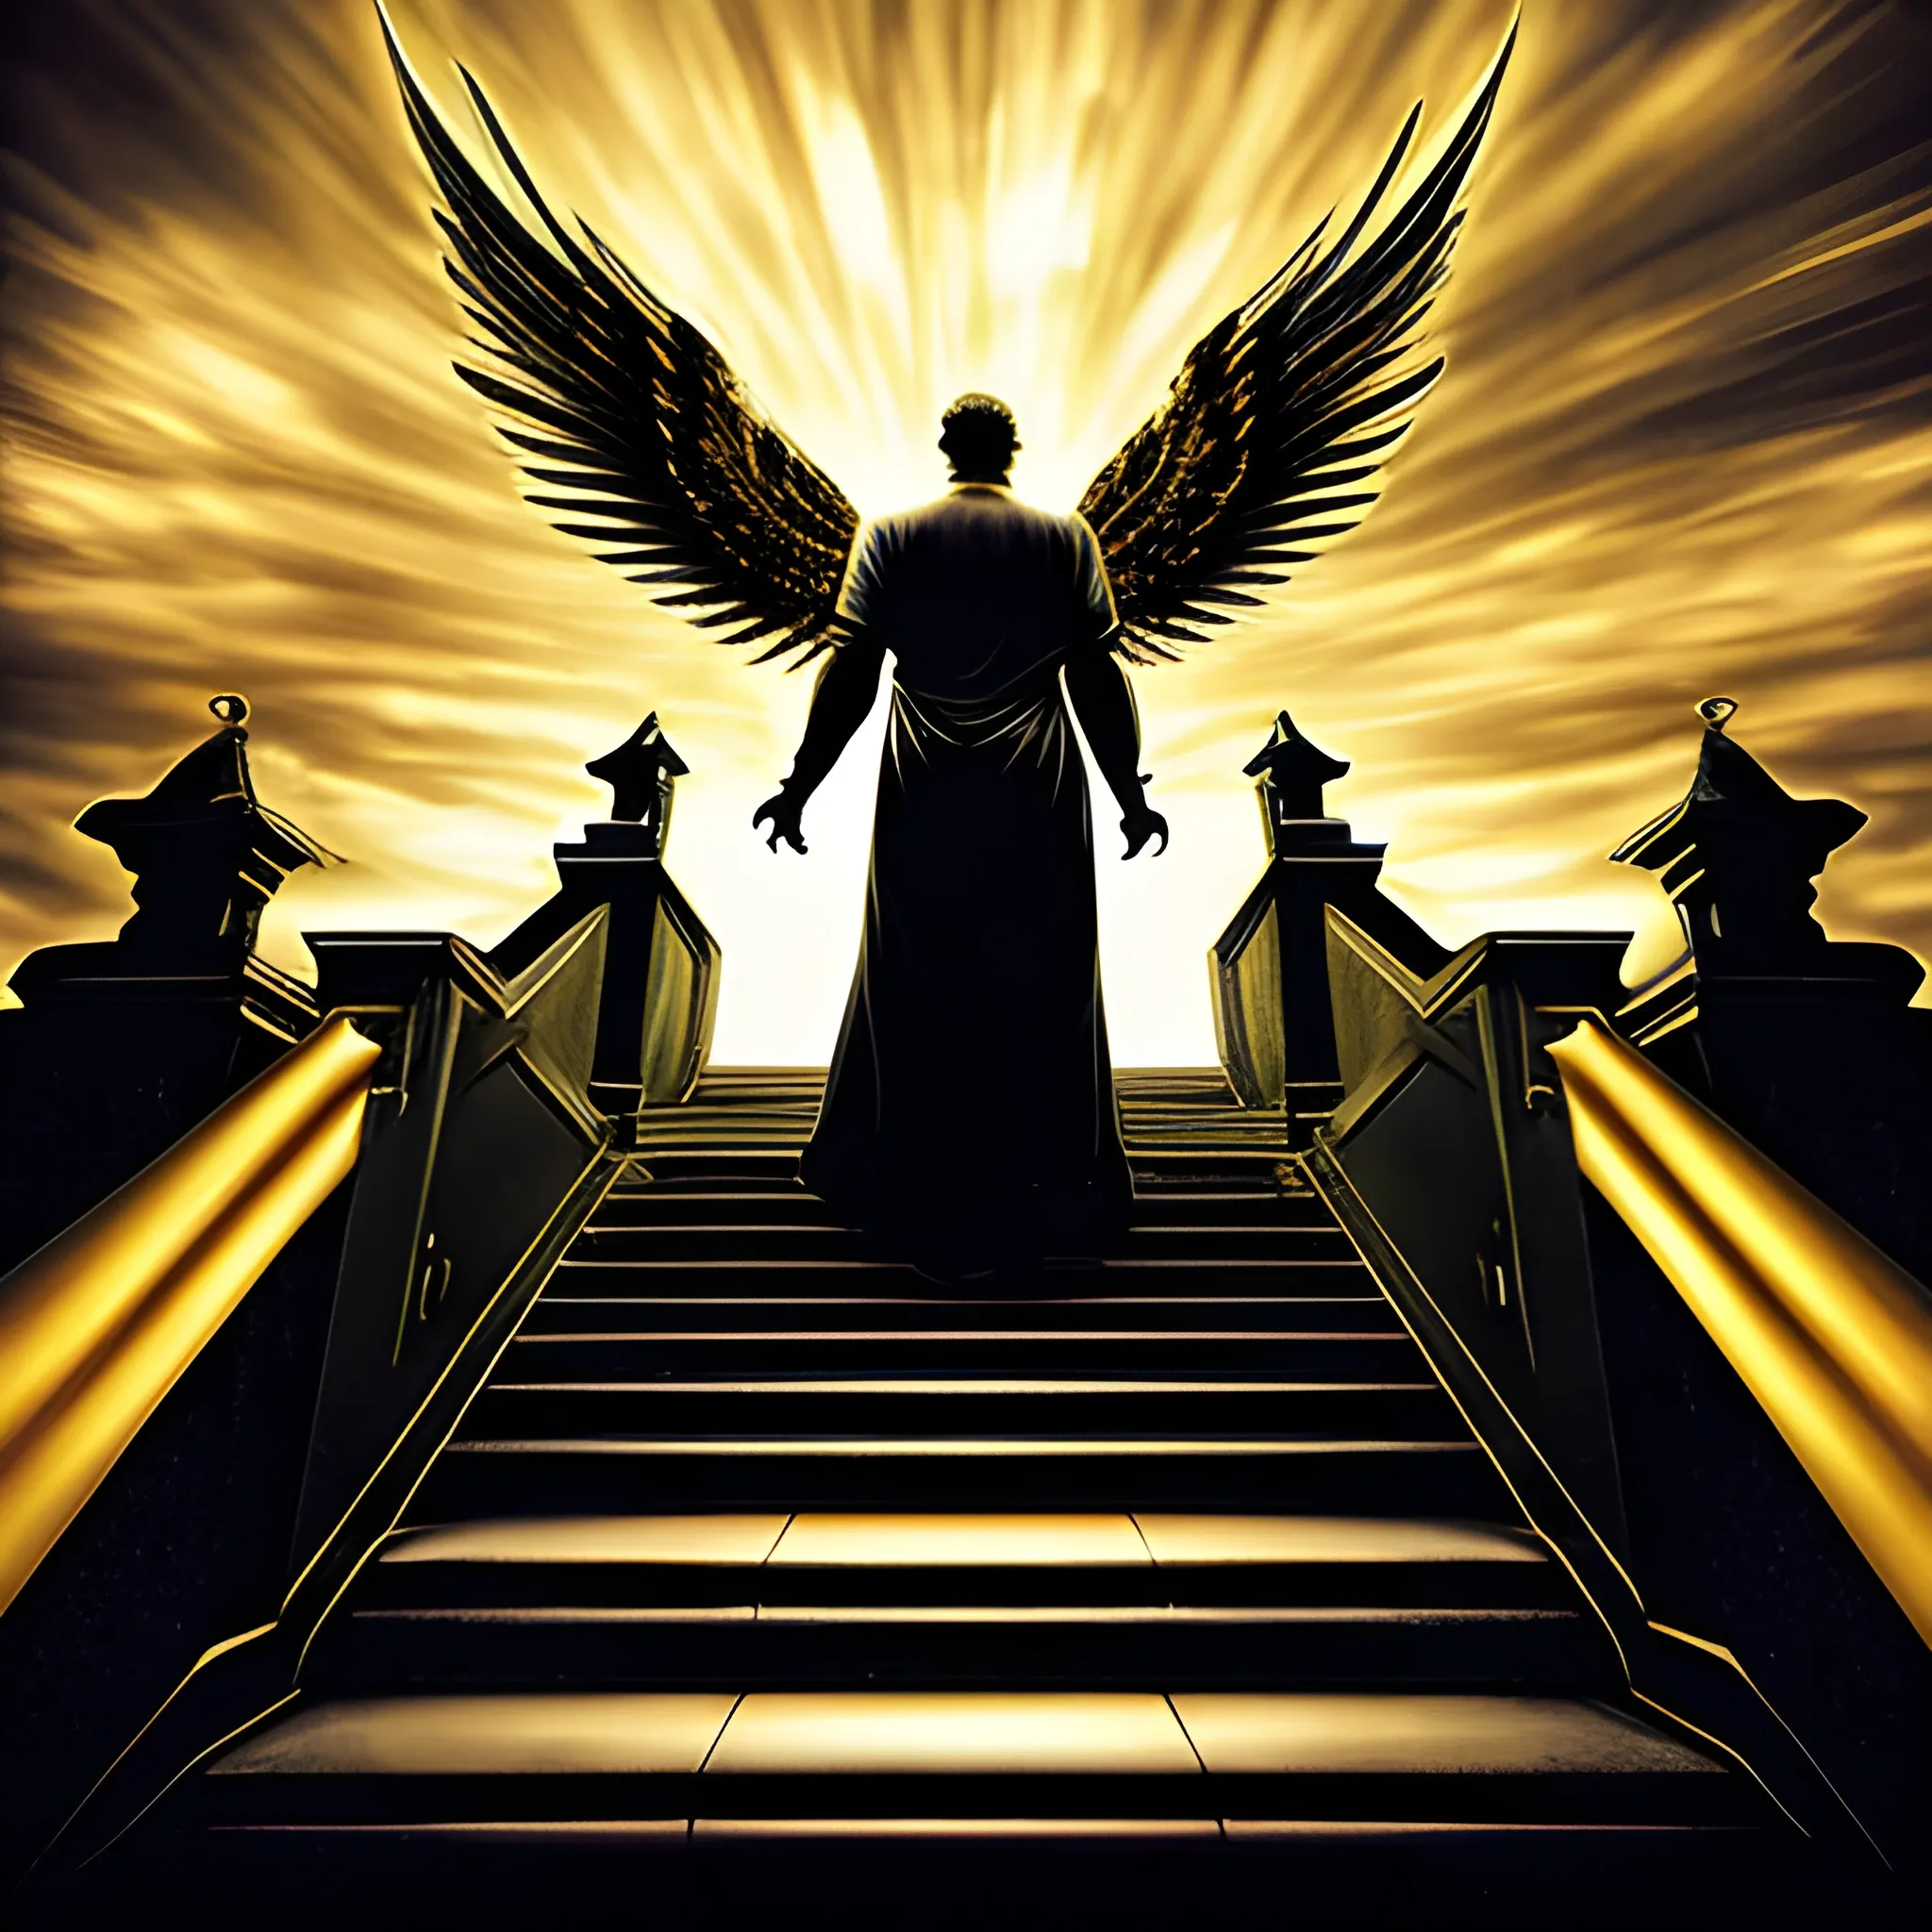 the angel of death climbing the stairs with his back to the gate ...